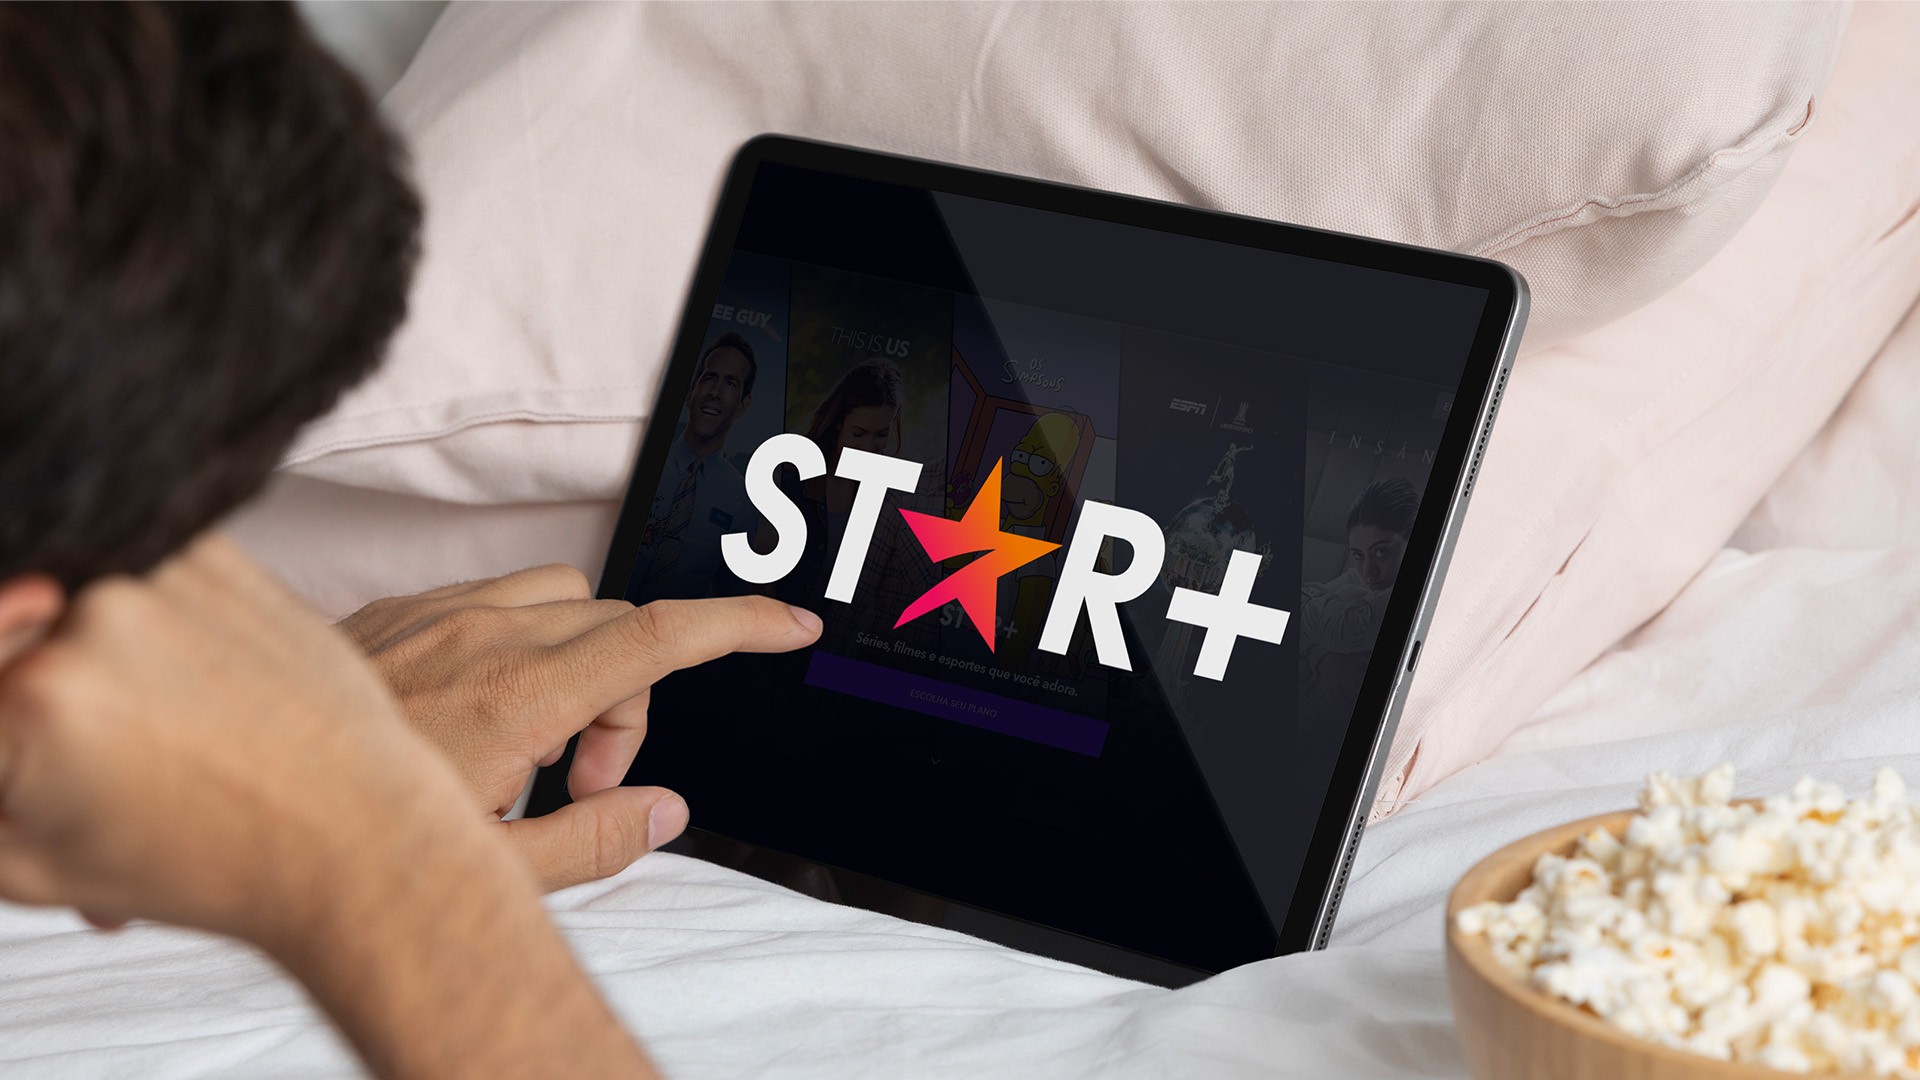 Star Plus: see what's new coming to the catalog in December 2022
